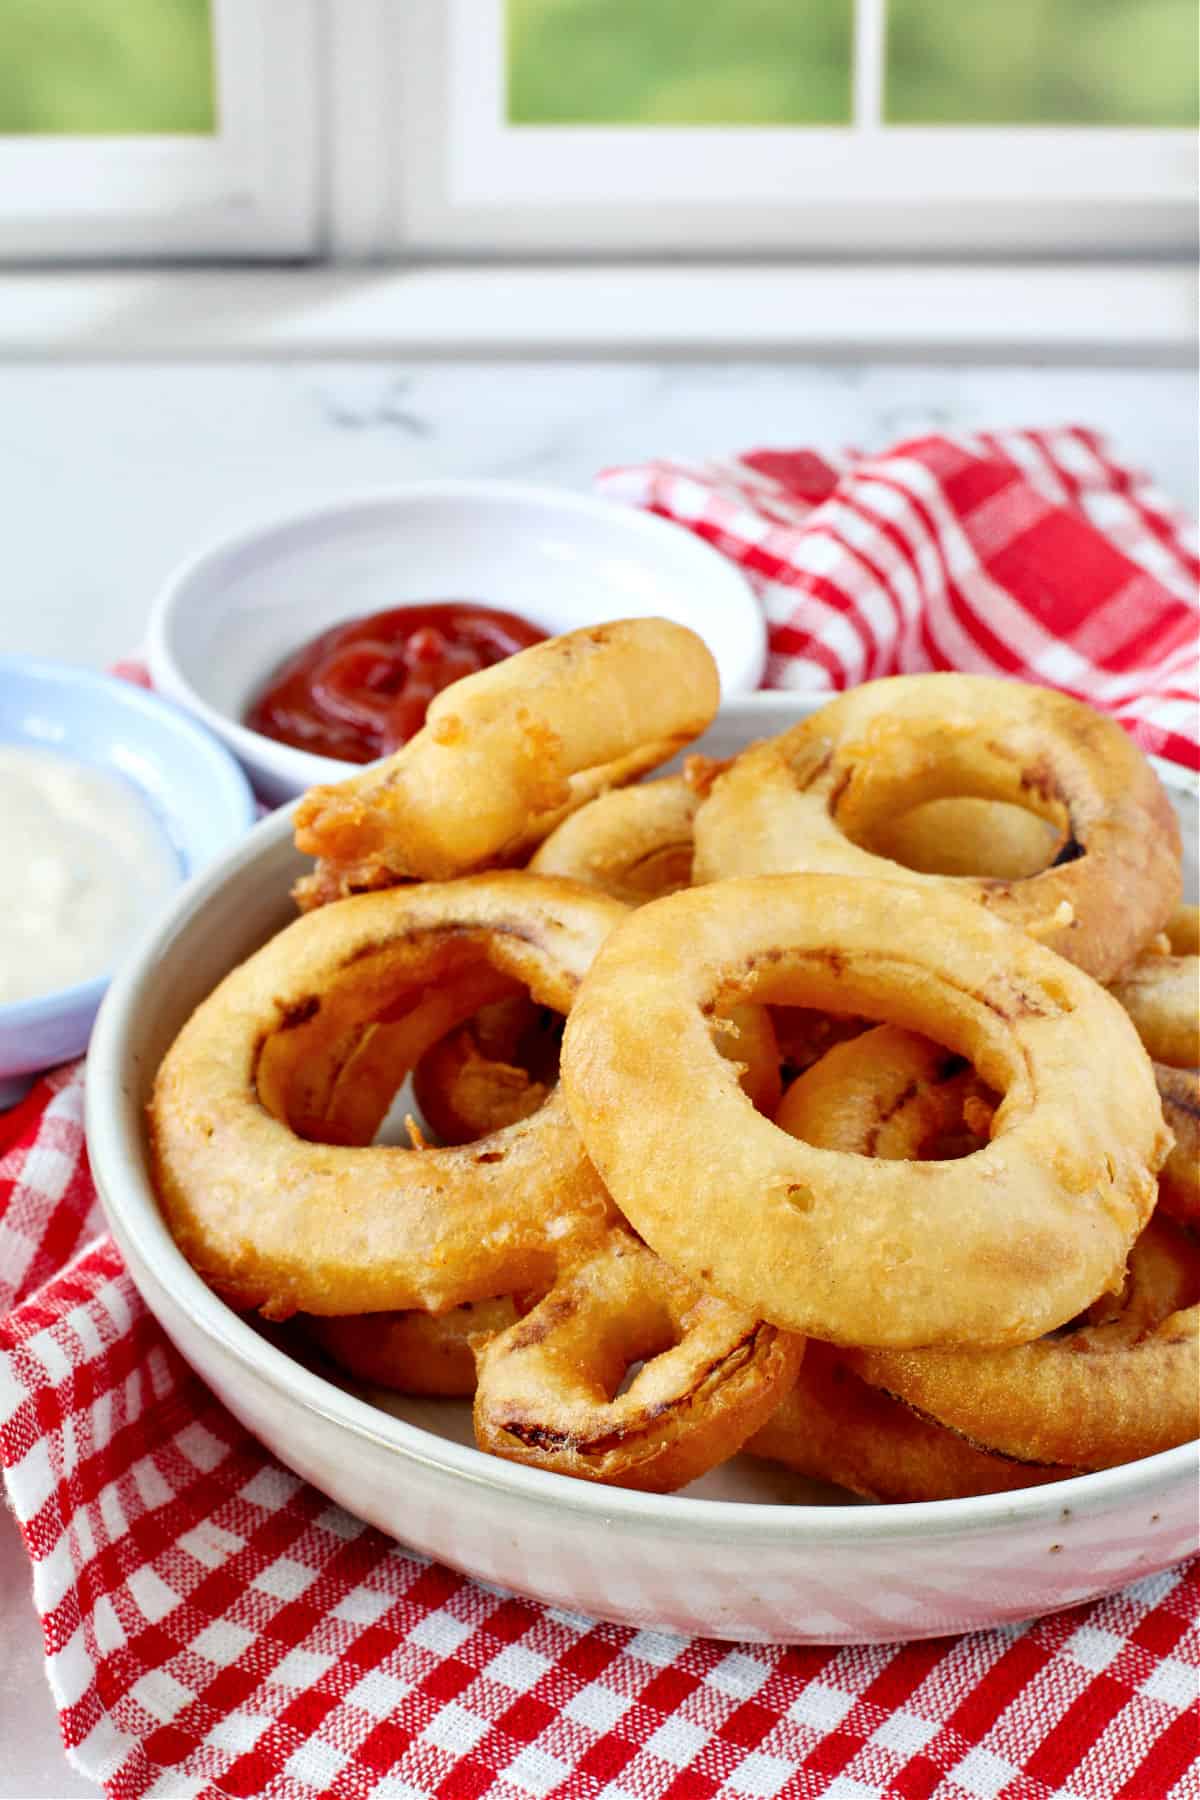 Three-Ingredient Sourdough Onion Rings with two dipping sauces.